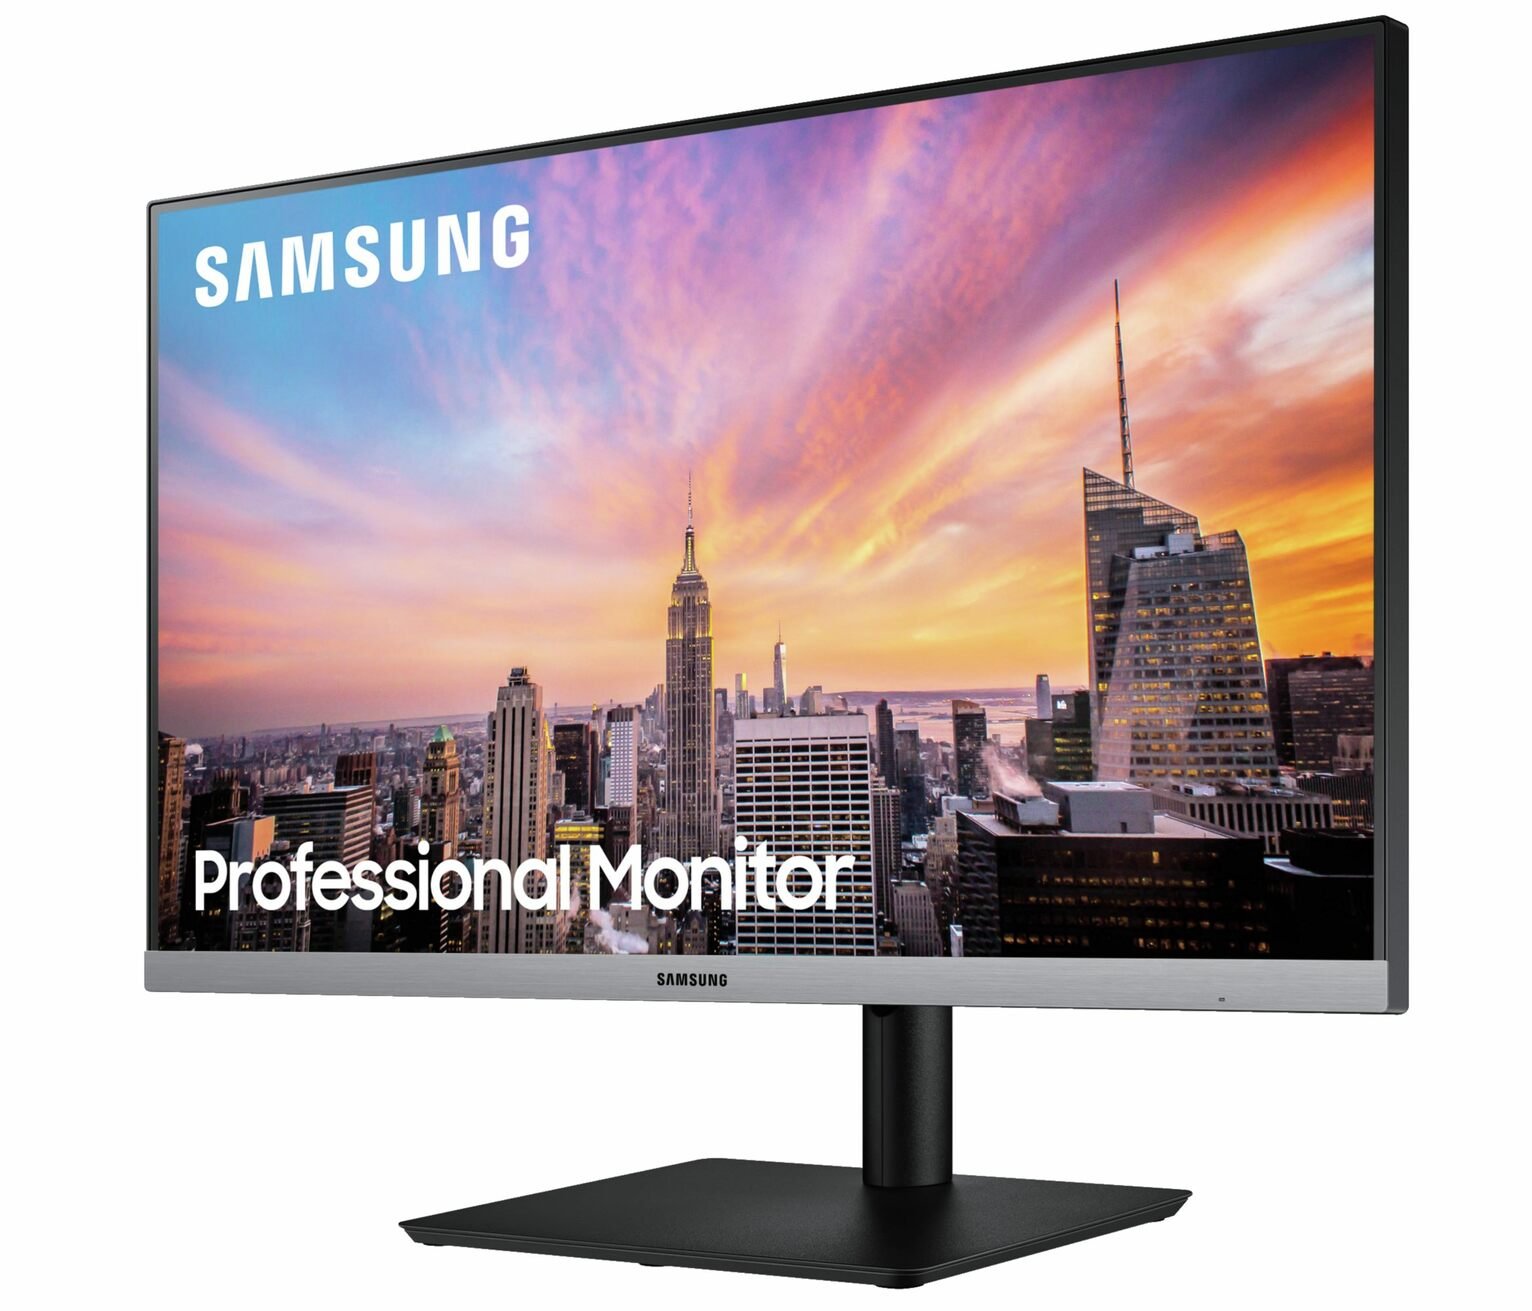 Samsung SR35 23.8 Inch FHD LCD Monitor Review